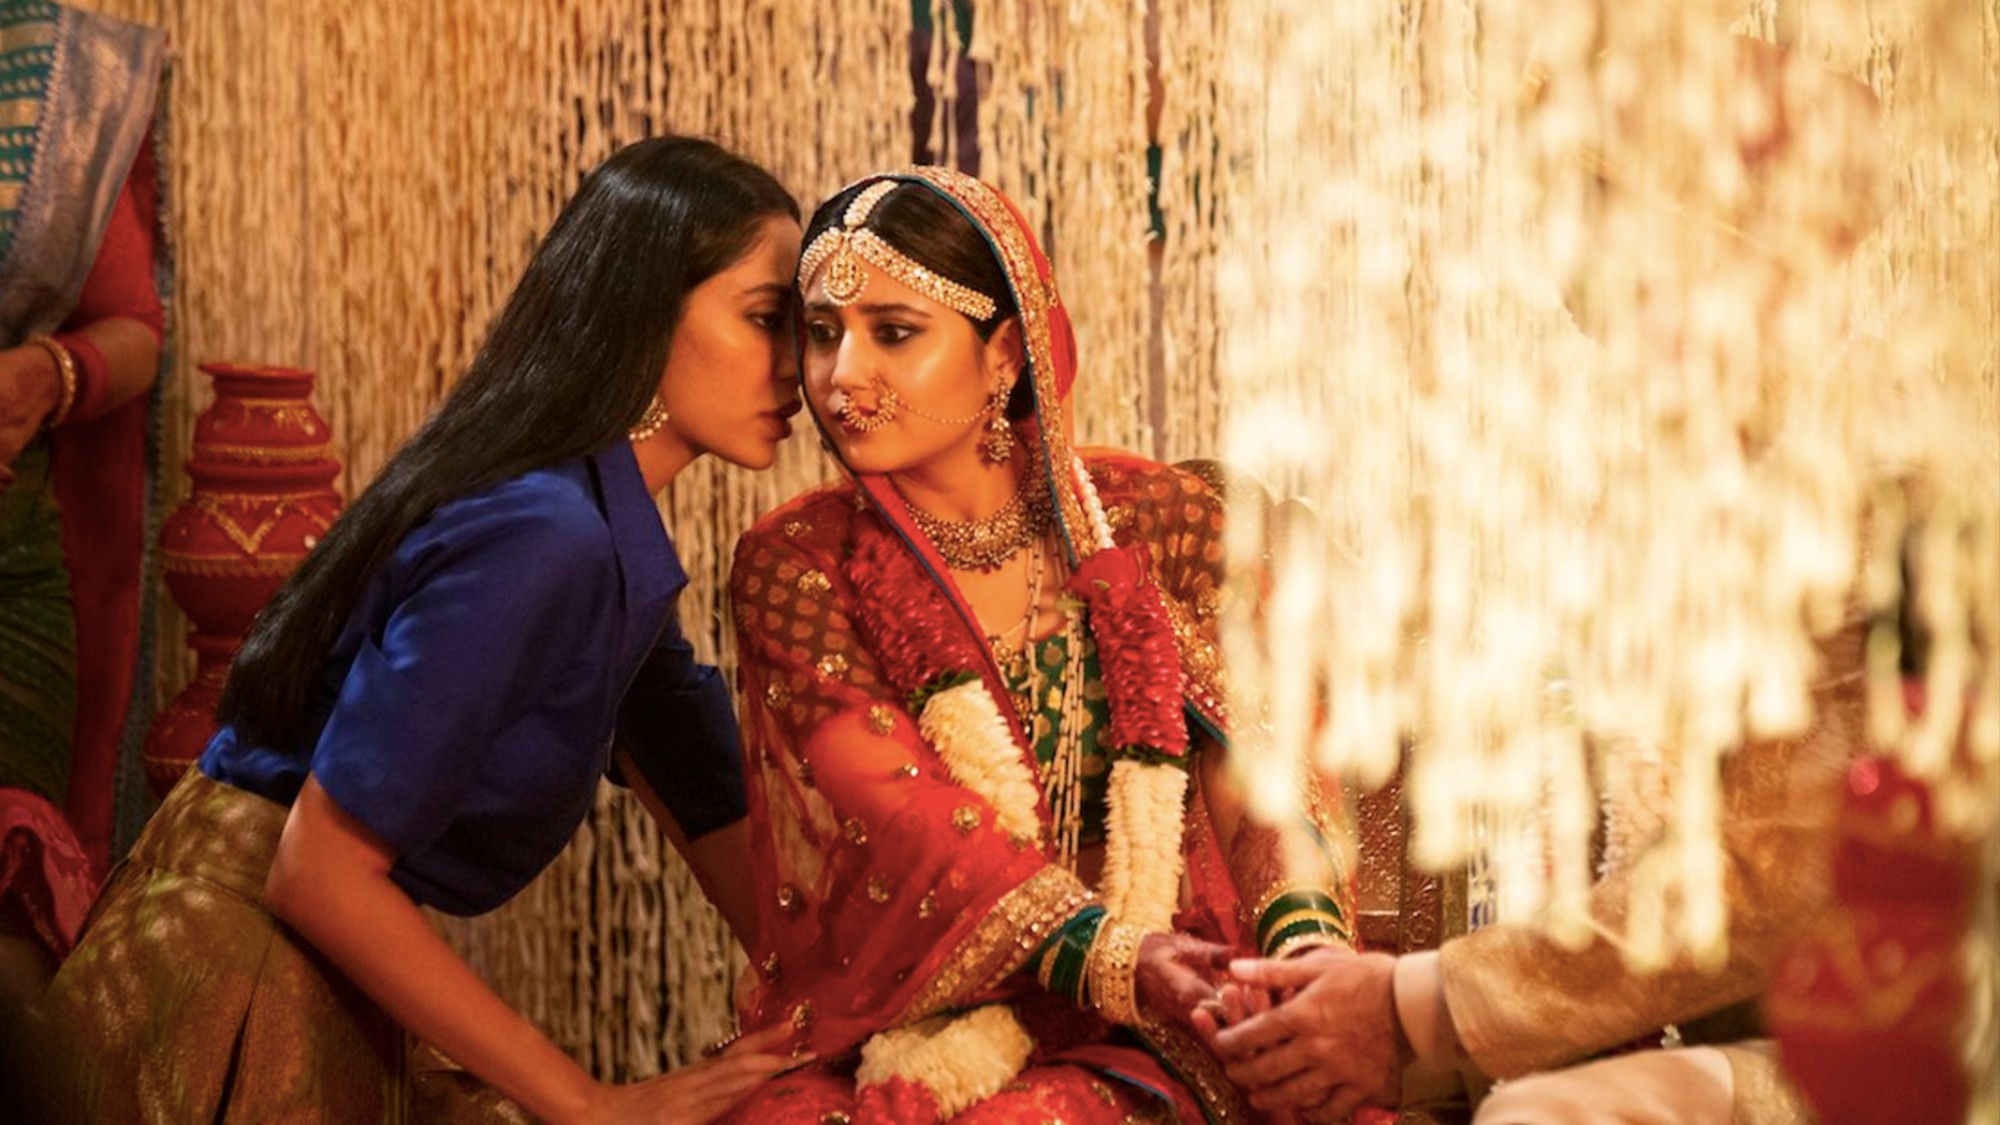 Uncensored Hollywood Sex - India's Best TV Shows Have Emerged From Uncensored Streaming ...